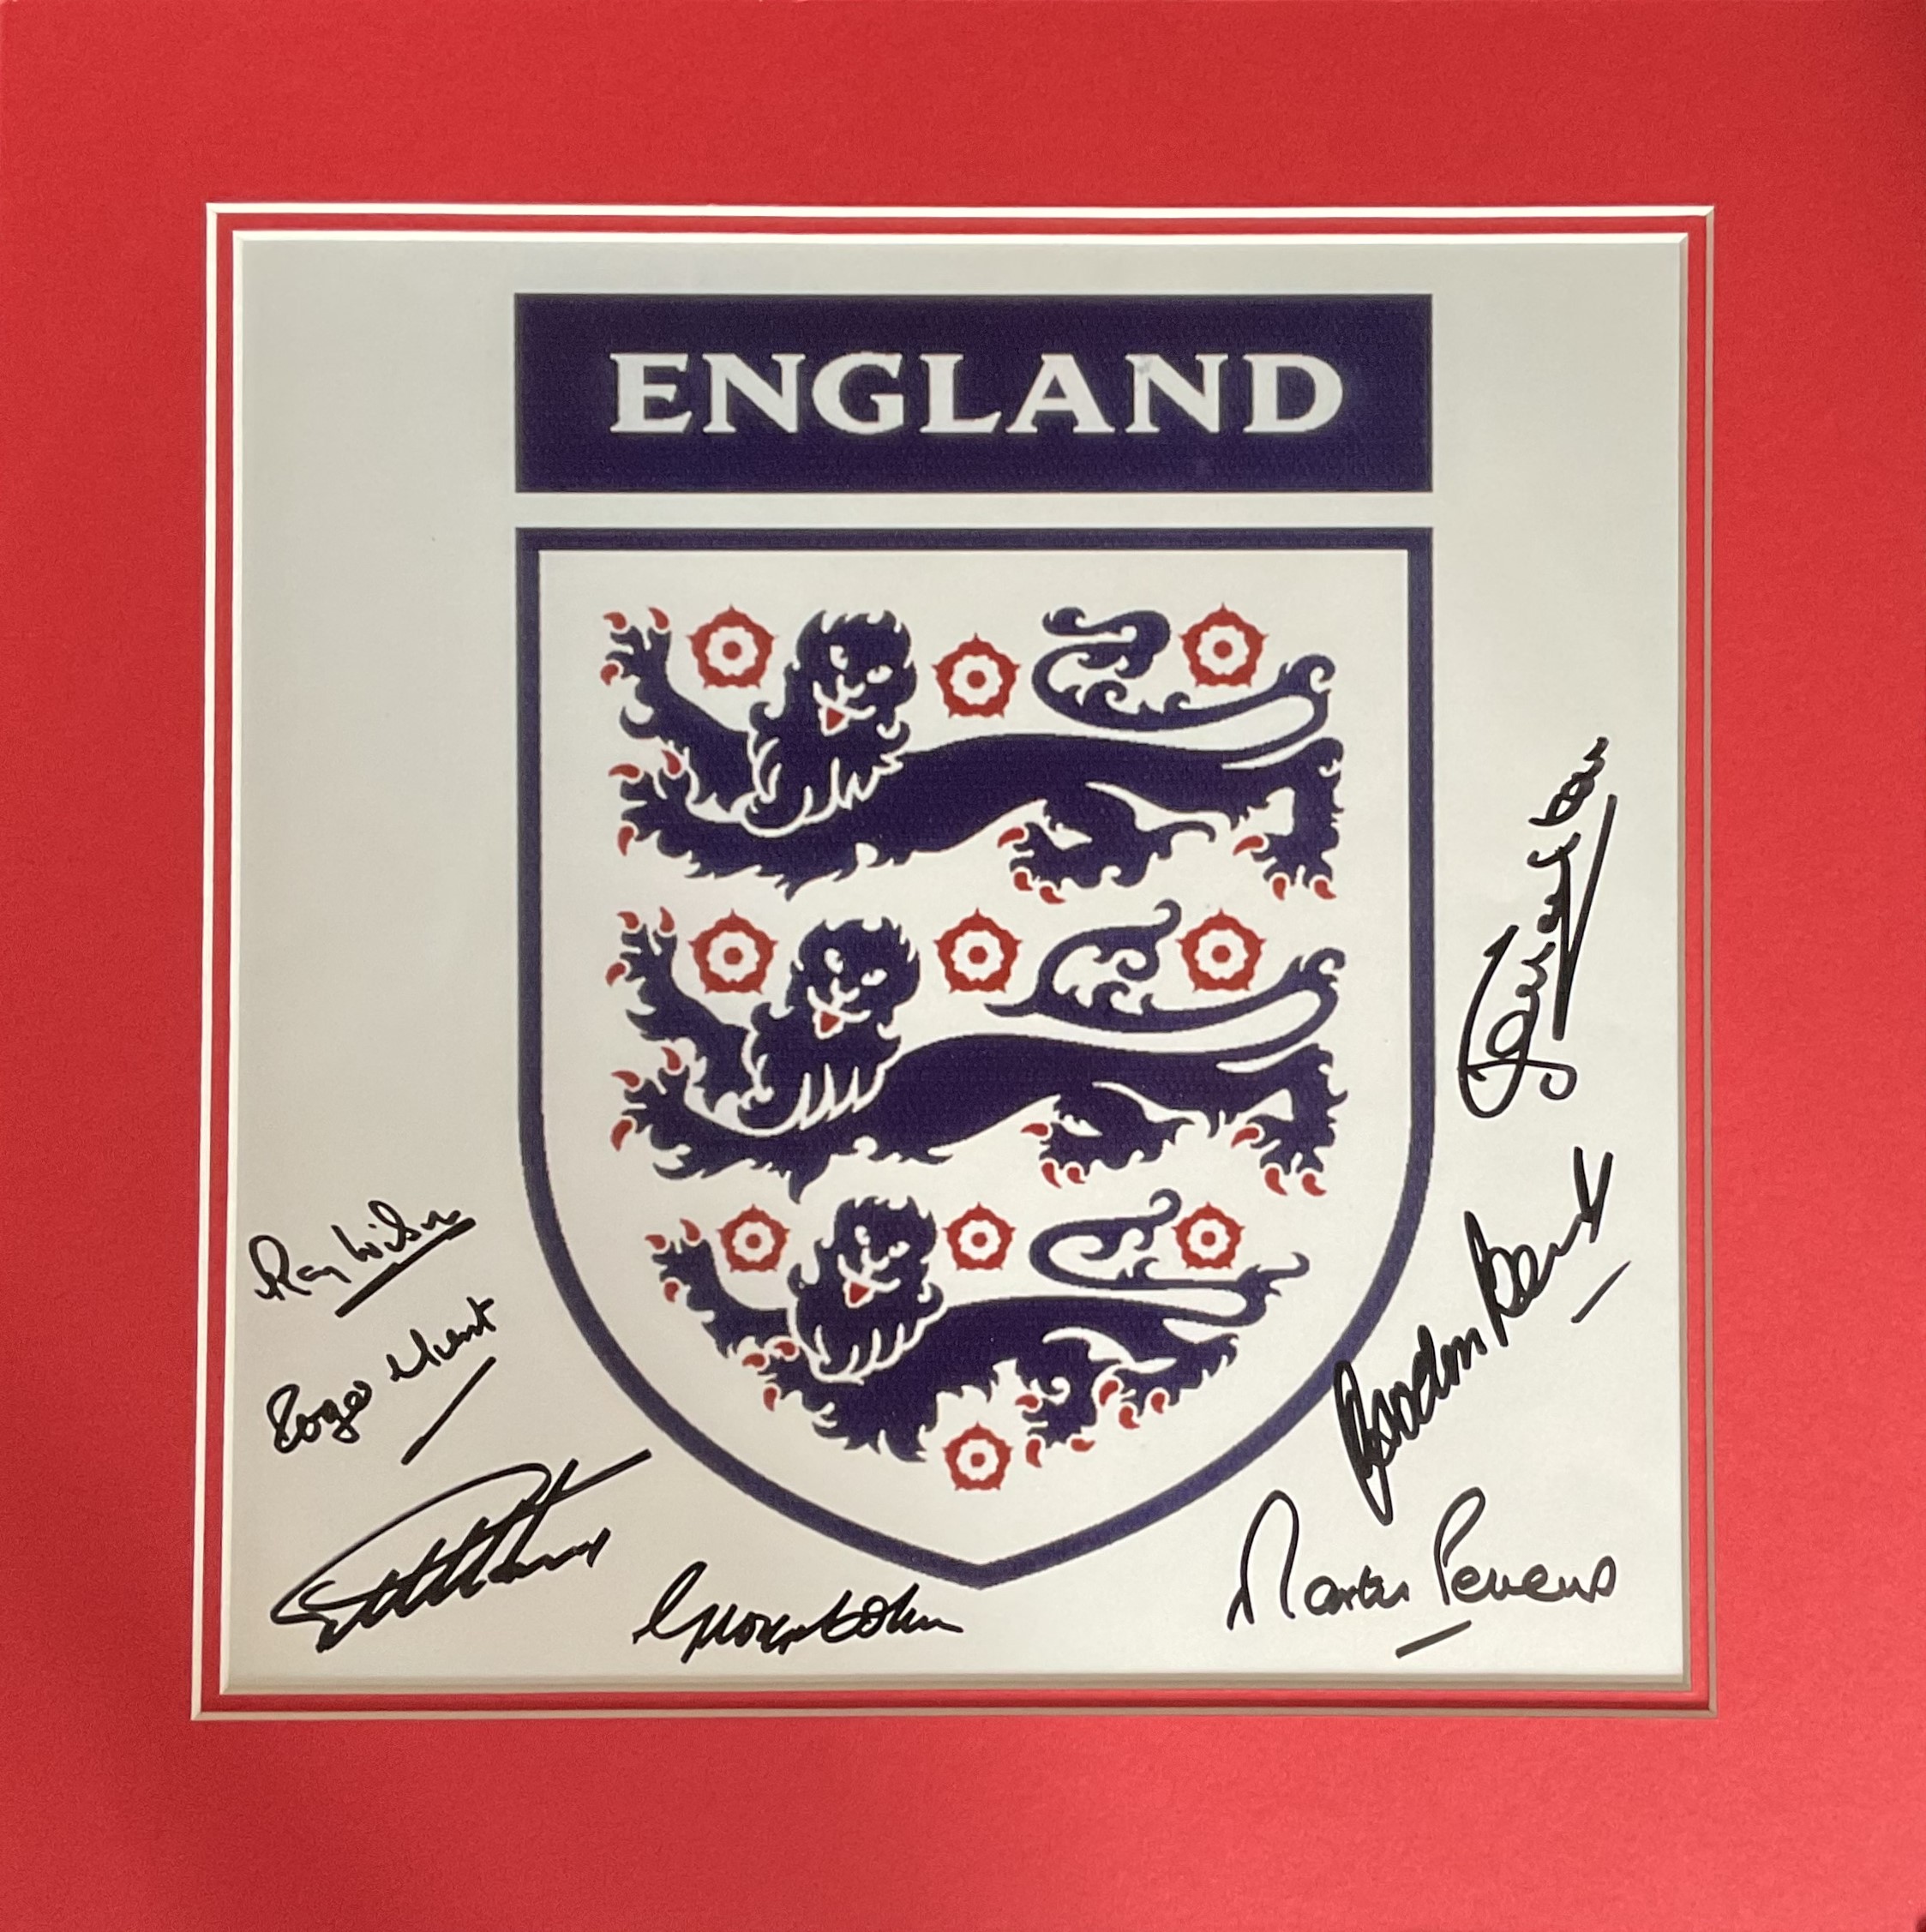 England 1966 World Cup Winners multi signed Three Lions 16x16 inch mounted signature piece